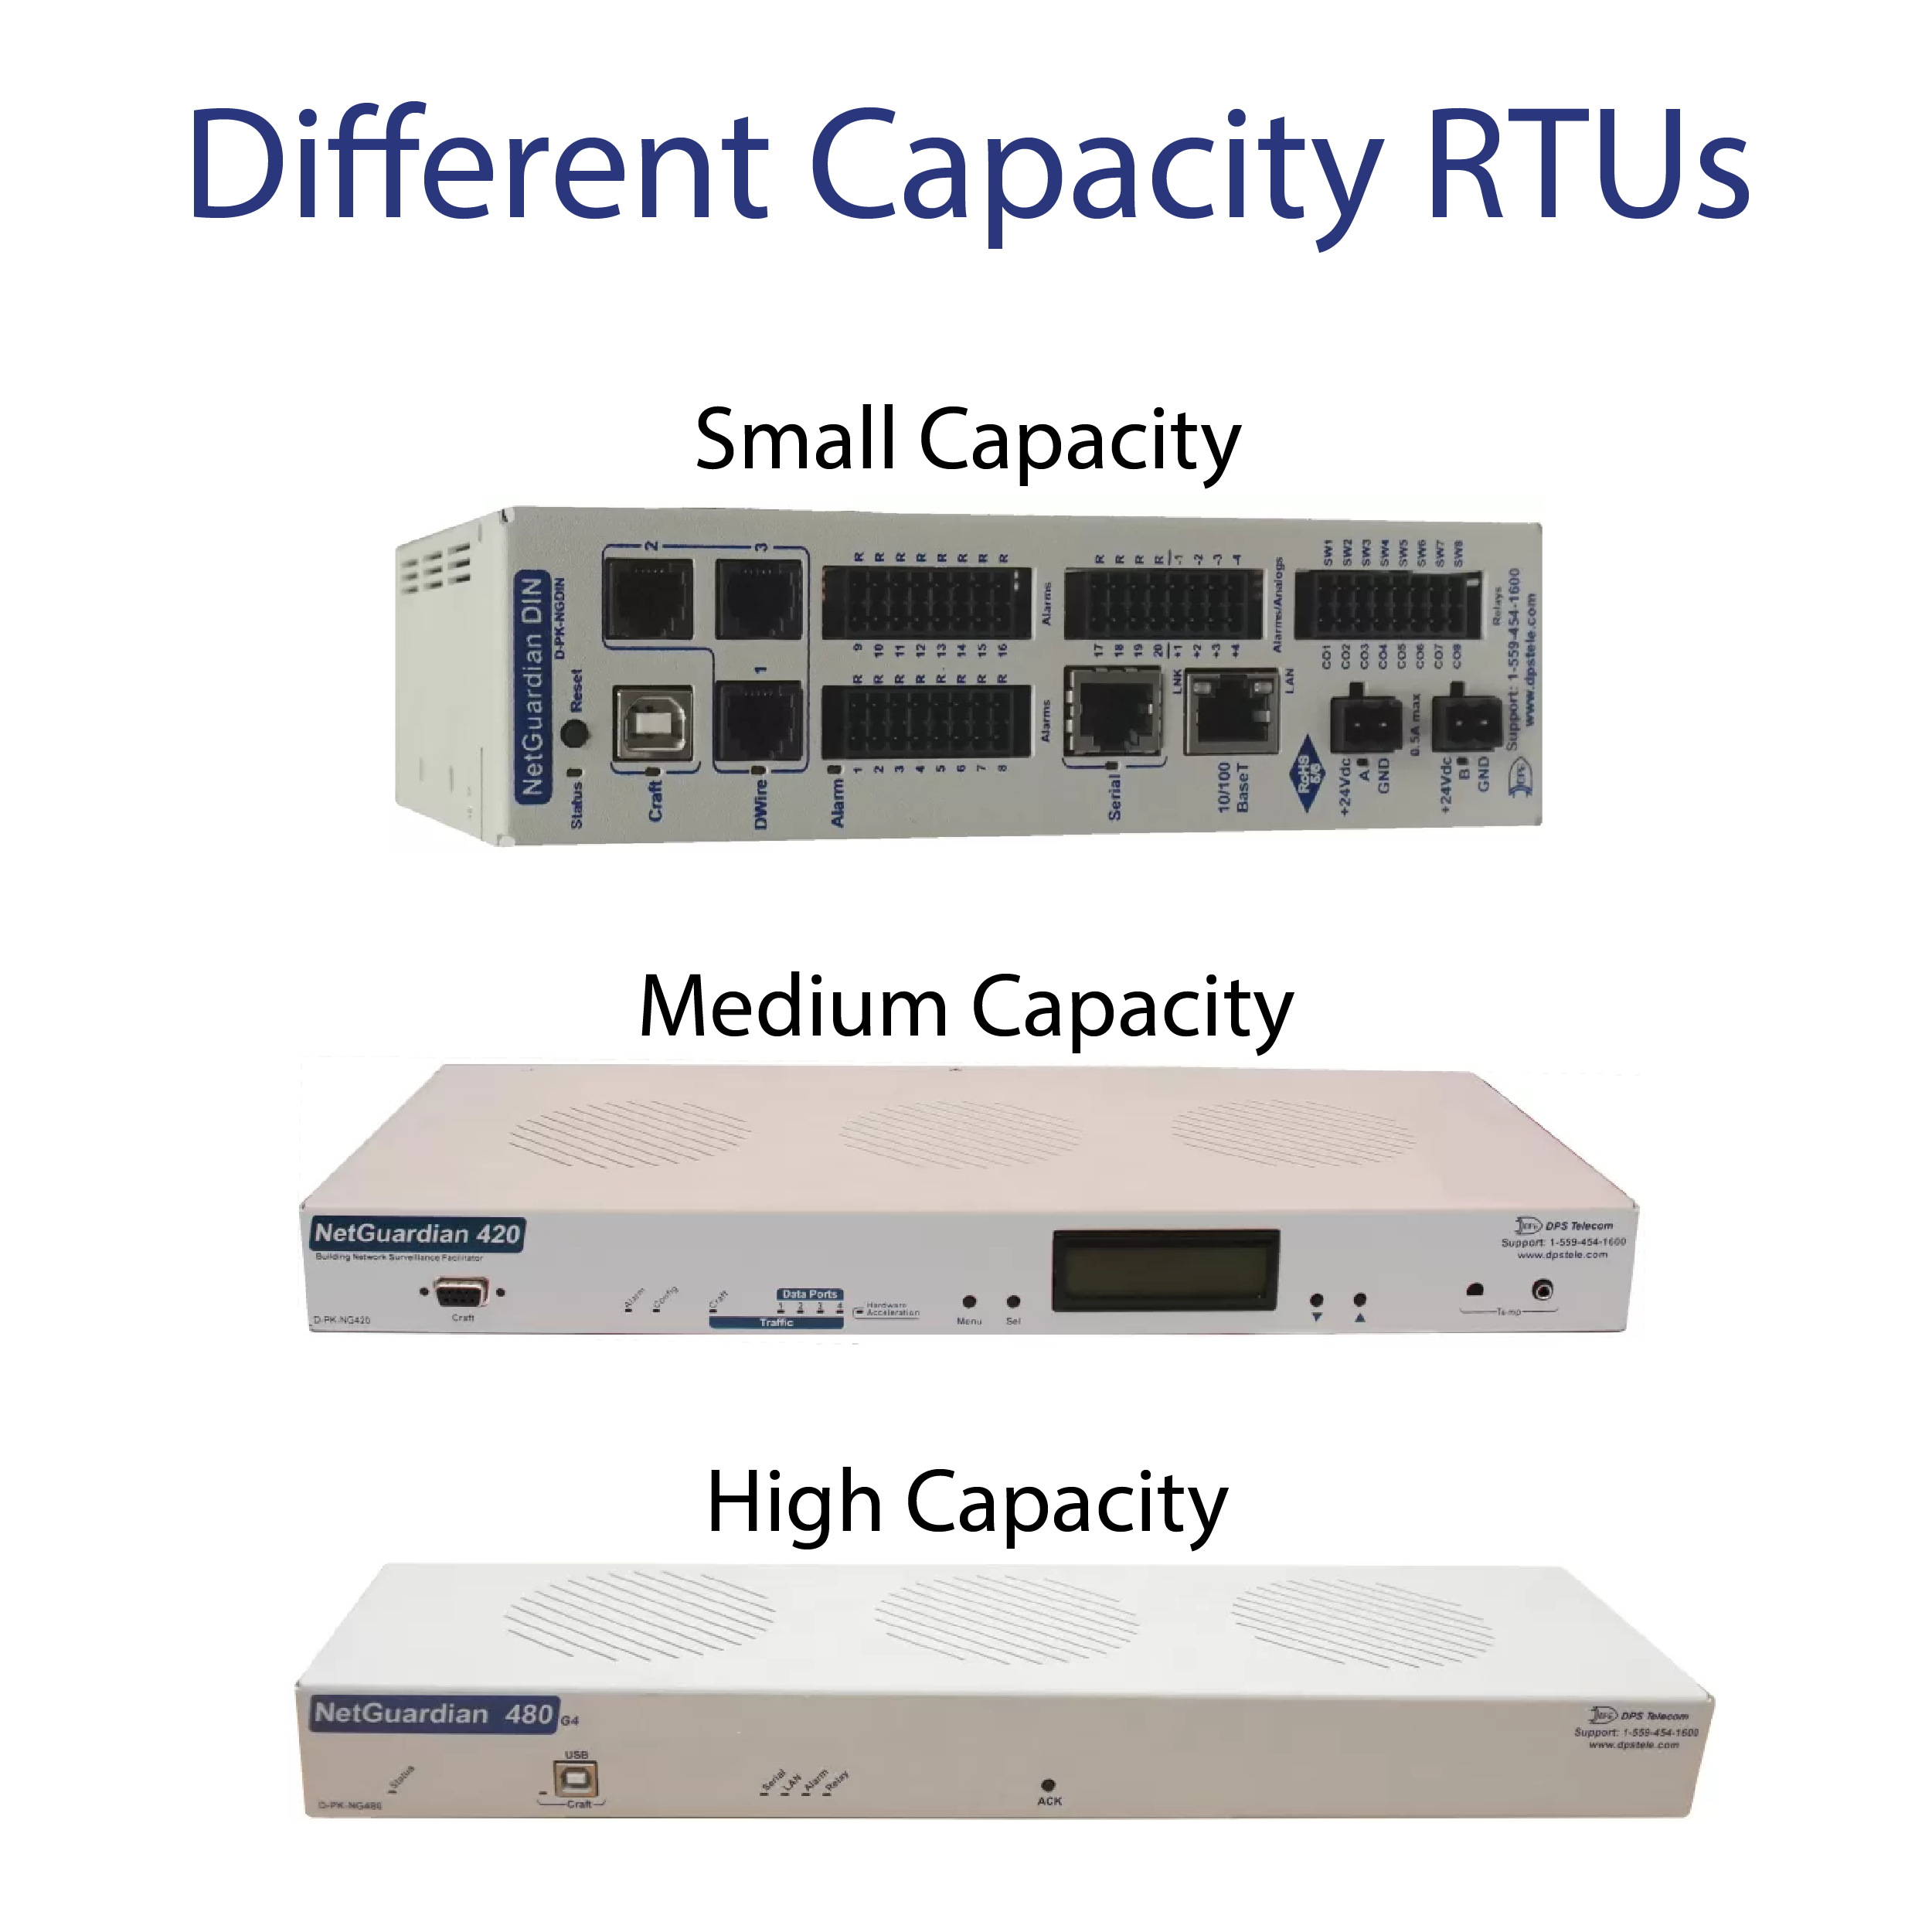 RTUs with different capacities